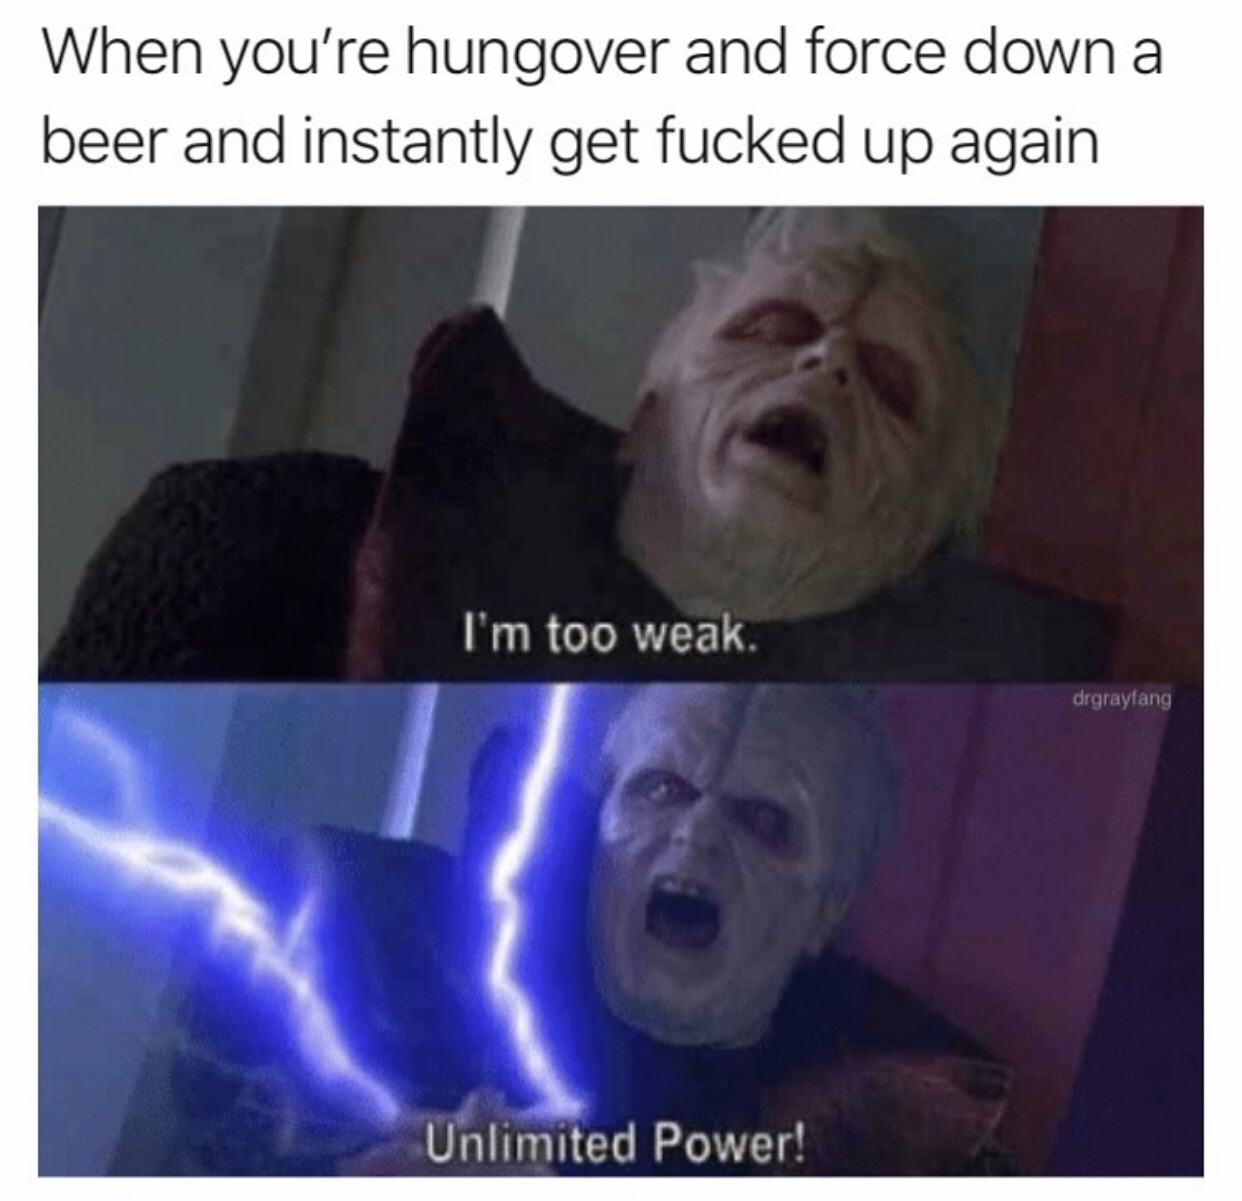 unlimited power meme - When you're hungover and force down a beer and instantly get fucked up again I'm too weak. drgrayang Unlimited Power!